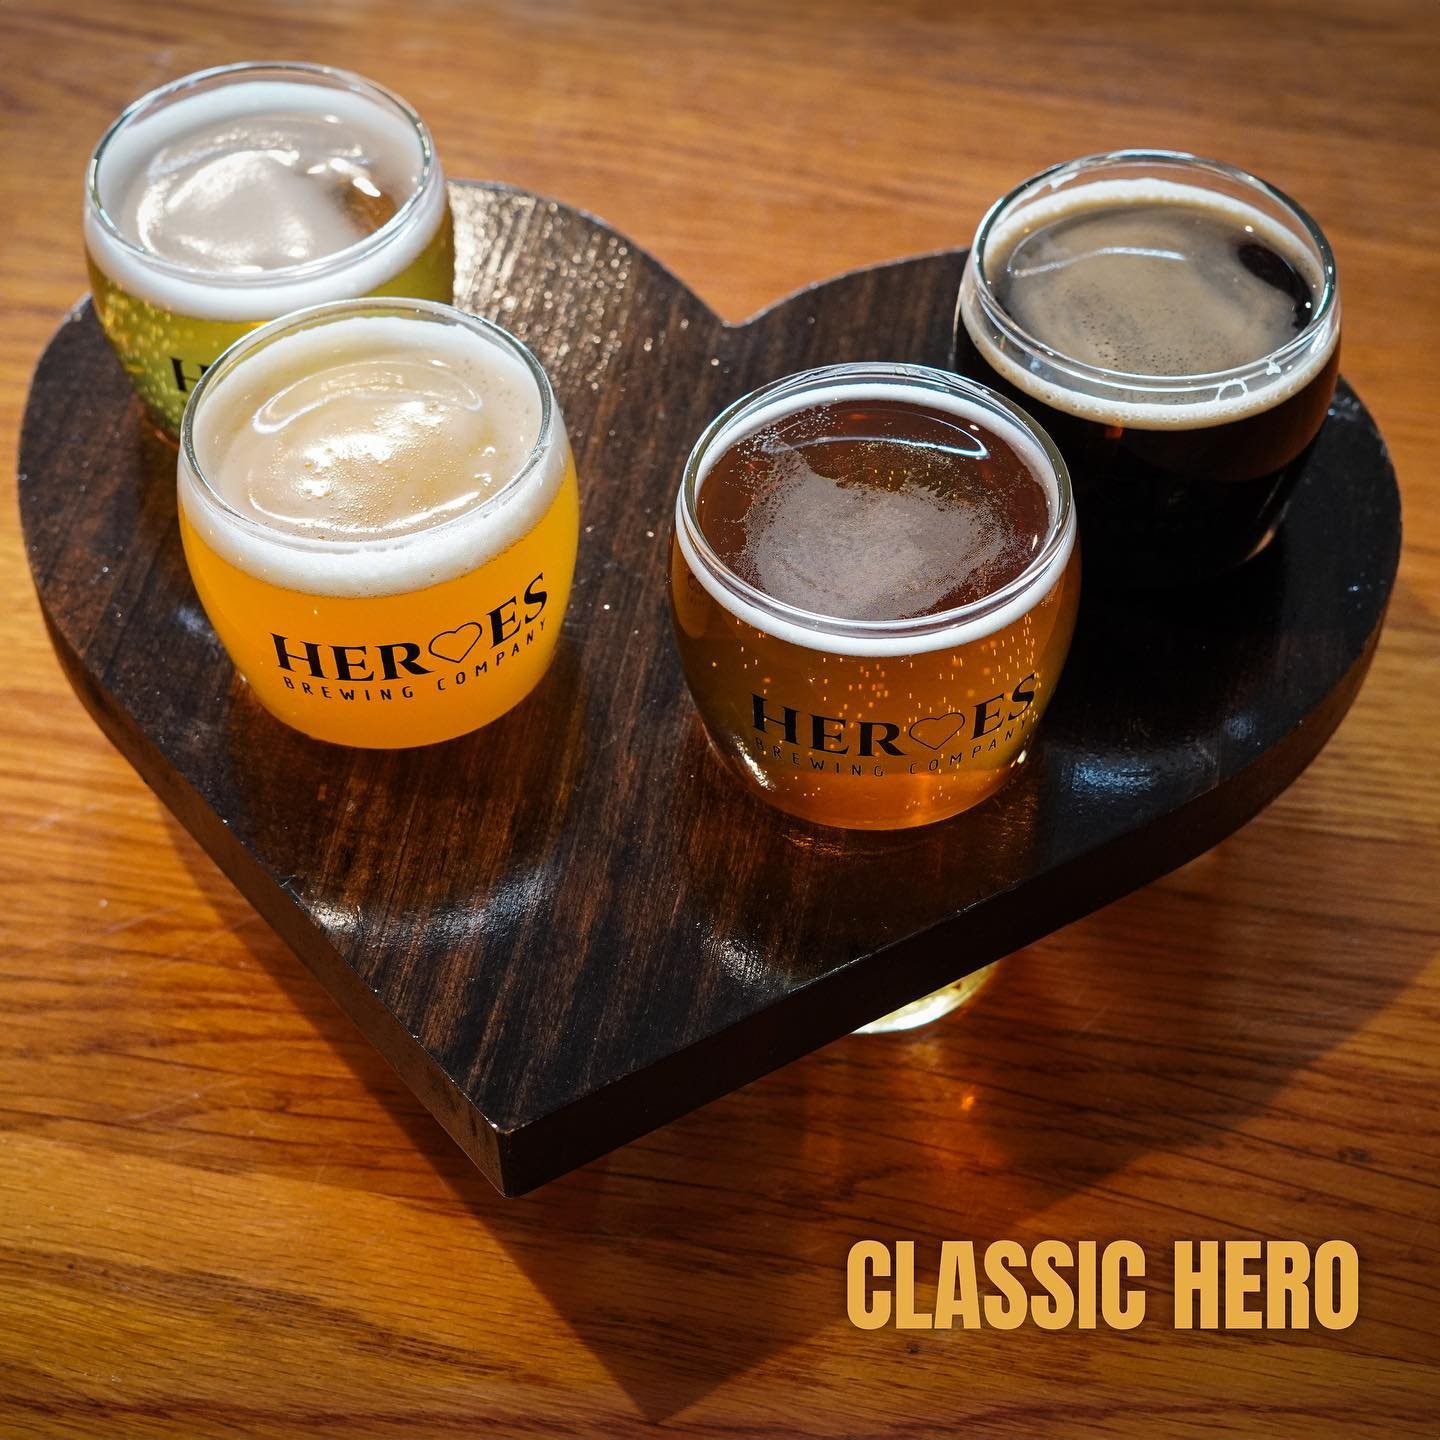 What kind of hero are you? Starting TODAY we are expanding our flight options. Sometimes 4 just isn&rsquo;t enough to taste the wide variety of #HeroesBrew. Enjoy a Classic Hero, Everyday Hero, Superhero, or Epic Hero&mdash;flights of 4, 8, 12 or 16 